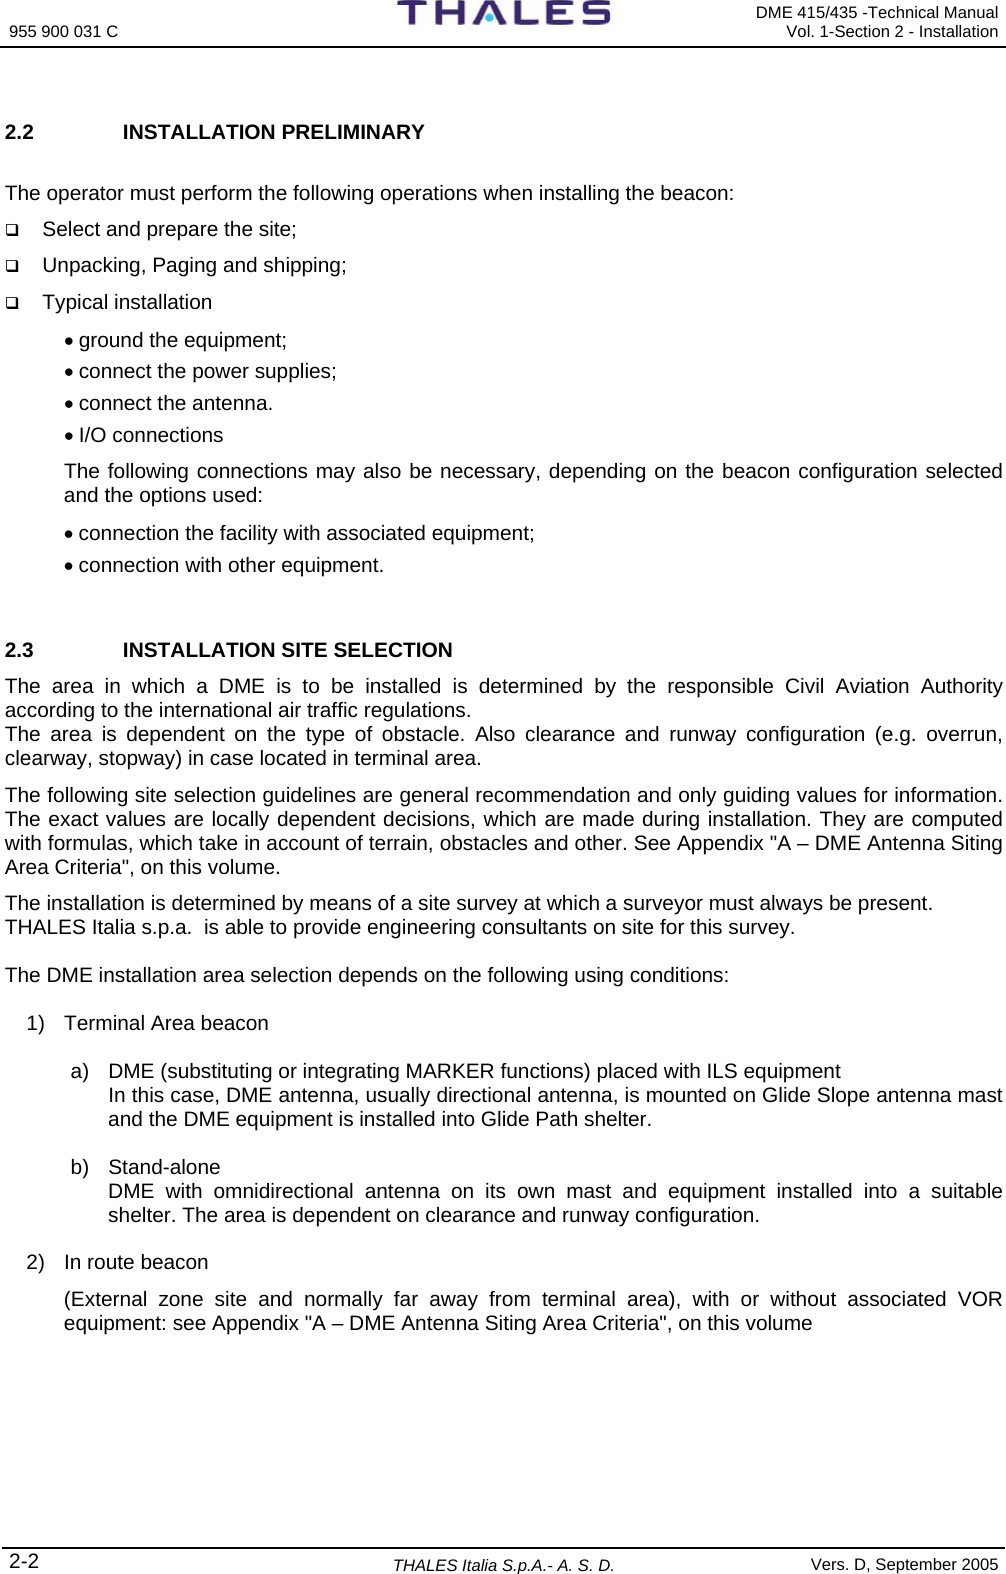 955 900 031 C   DME 415/435 -Technical Manual Vol. 1-Section 2 - Installation 2-2 THALES Italia S.p.A.- A. S. D. Vers. D, September 2005  2.2 INSTALLATION PRELIMINARY  The operator must perform the following operations when installing the beacon:  Select and prepare the site;  Unpacking, Paging and shipping;   Typical installation  • ground the equipment; • connect the power supplies; • connect the antenna. • I/O connections The following connections may also be necessary, depending on the beacon configuration selected and the options used: • connection the facility with associated equipment; • connection with other equipment.  2.3  INSTALLATION SITE SELECTION The area in which a DME is to be installed is determined by the responsible Civil Aviation Authority according to the international air traffic regulations.  The area is dependent on the type of obstacle. Also clearance and runway configuration (e.g. overrun, clearway, stopway) in case located in terminal area. The following site selection guidelines are general recommendation and only guiding values for information. The exact values are locally dependent decisions, which are made during installation. They are computed with formulas, which take in account of terrain, obstacles and other. See Appendix &quot;A – DME Antenna Siting Area Criteria&quot;, on this volume. The installation is determined by means of a site survey at which a surveyor must always be present.  THALES Italia s.p.a.  is able to provide engineering consultants on site for this survey.  The DME installation area selection depends on the following using conditions:  1)  Terminal Area beacon  a)  DME (substituting or integrating MARKER functions) placed with ILS equipment In this case, DME antenna, usually directional antenna, is mounted on Glide Slope antenna mast and the DME equipment is installed into Glide Path shelter.  b) Stand-alone DME with omnidirectional antenna on its own mast and equipment installed into a suitable shelter. The area is dependent on clearance and runway configuration.  2)  In route beacon  (External zone site and normally far away from terminal area), with or without associated VOR equipment: see Appendix &quot;A – DME Antenna Siting Area Criteria&quot;, on this volume      